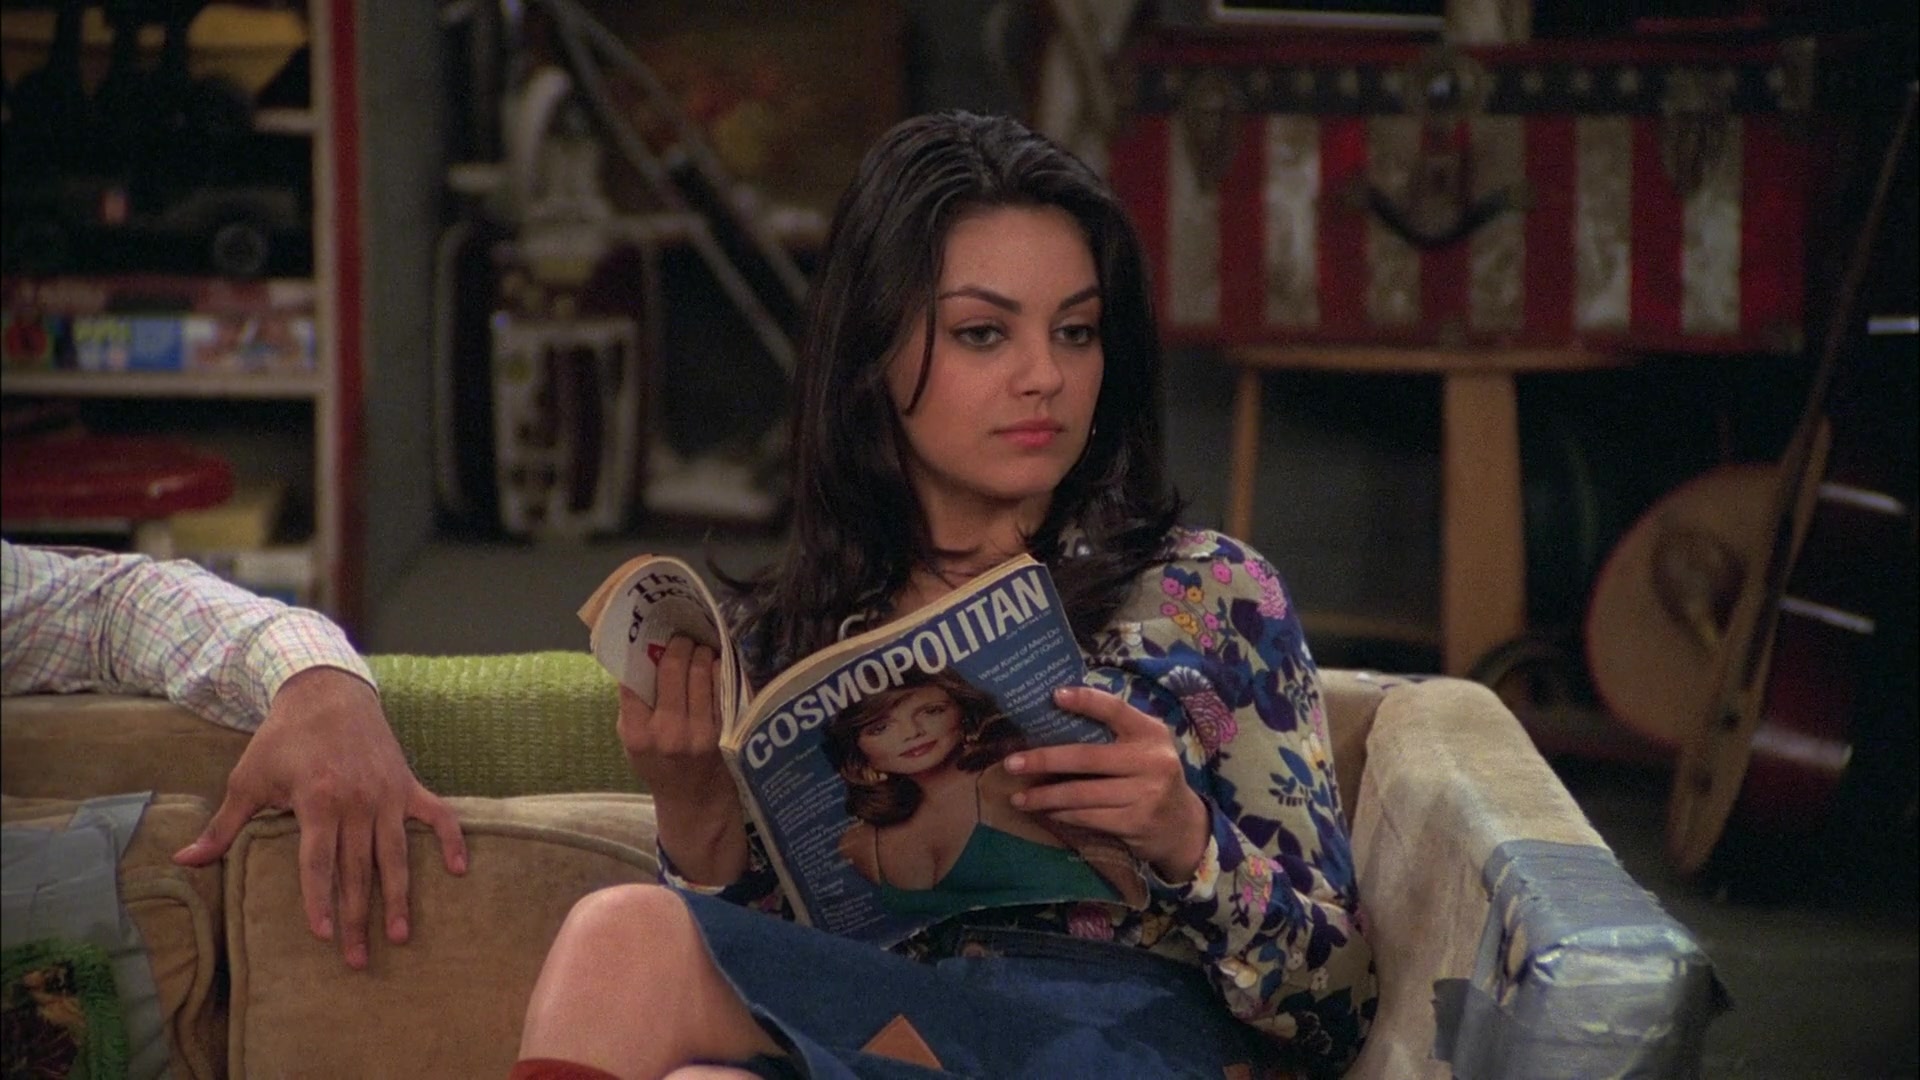 Jackie Burkhart from That 70s Show reading Cosmo and being snarky as usual.  